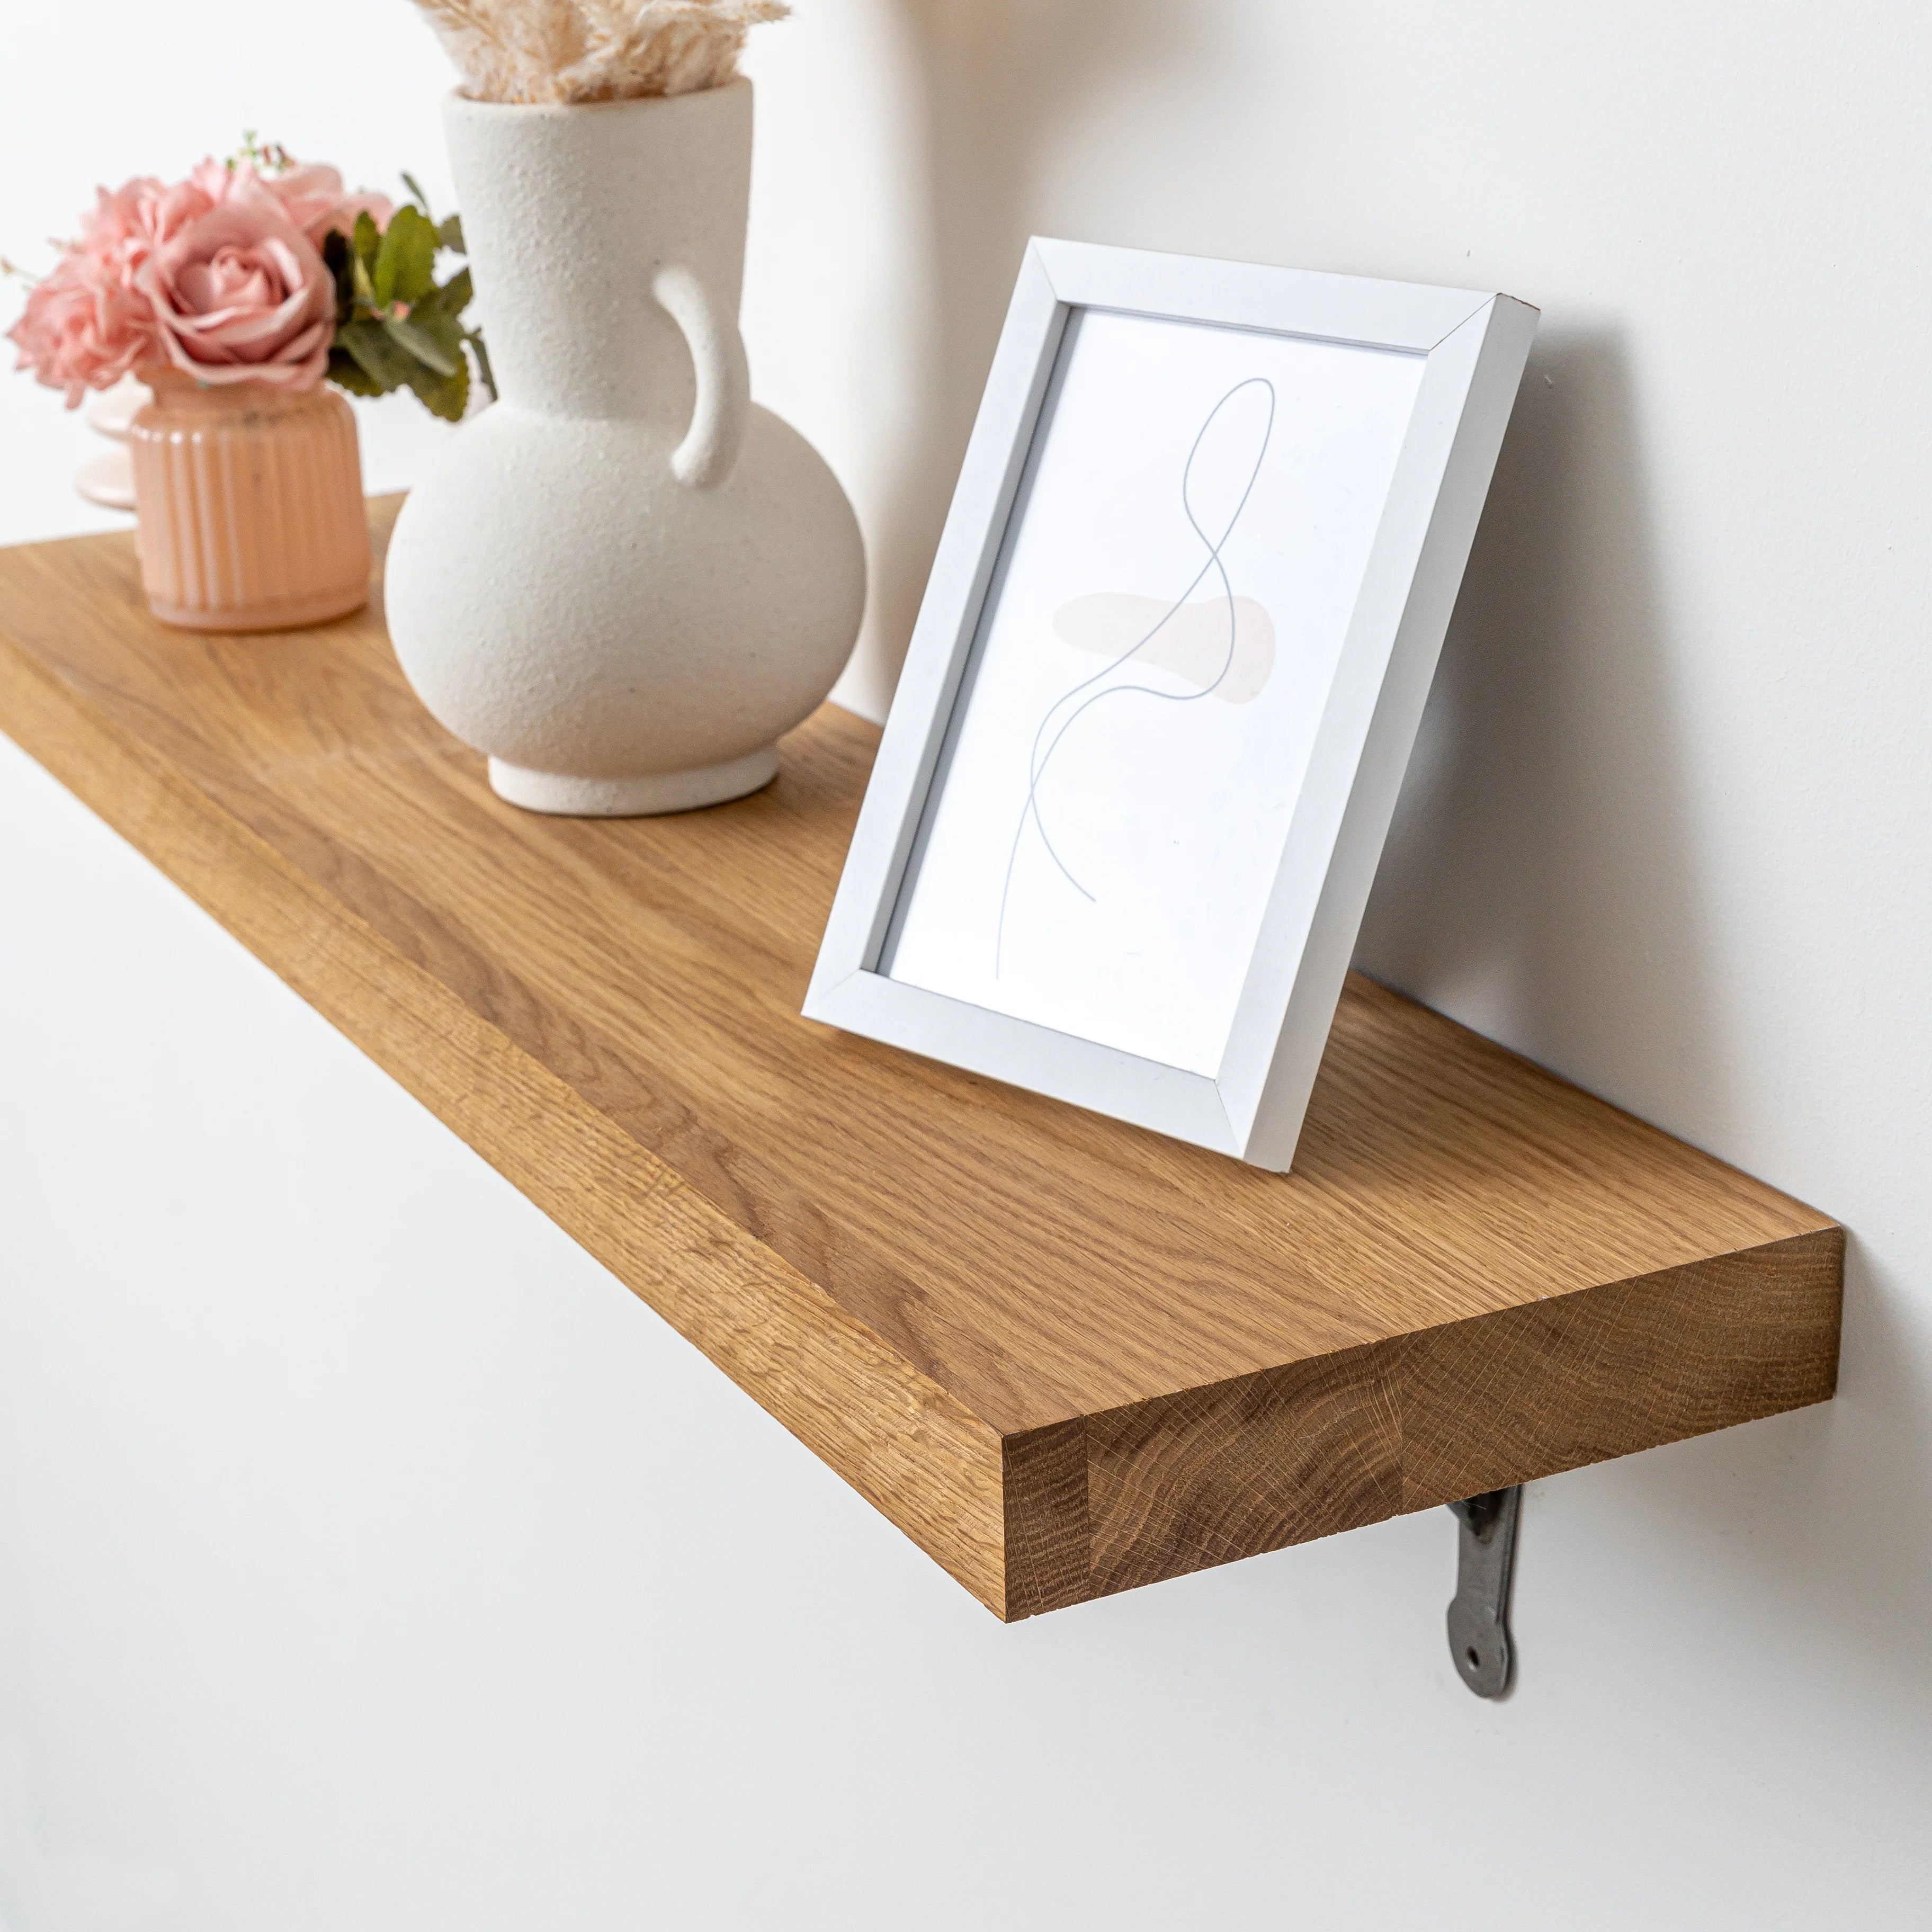 Full Stave Prime Oak Solid Wood Shelf - 40mm thick with Antique Iron Hand-Forged Gallows Shelf Brackets